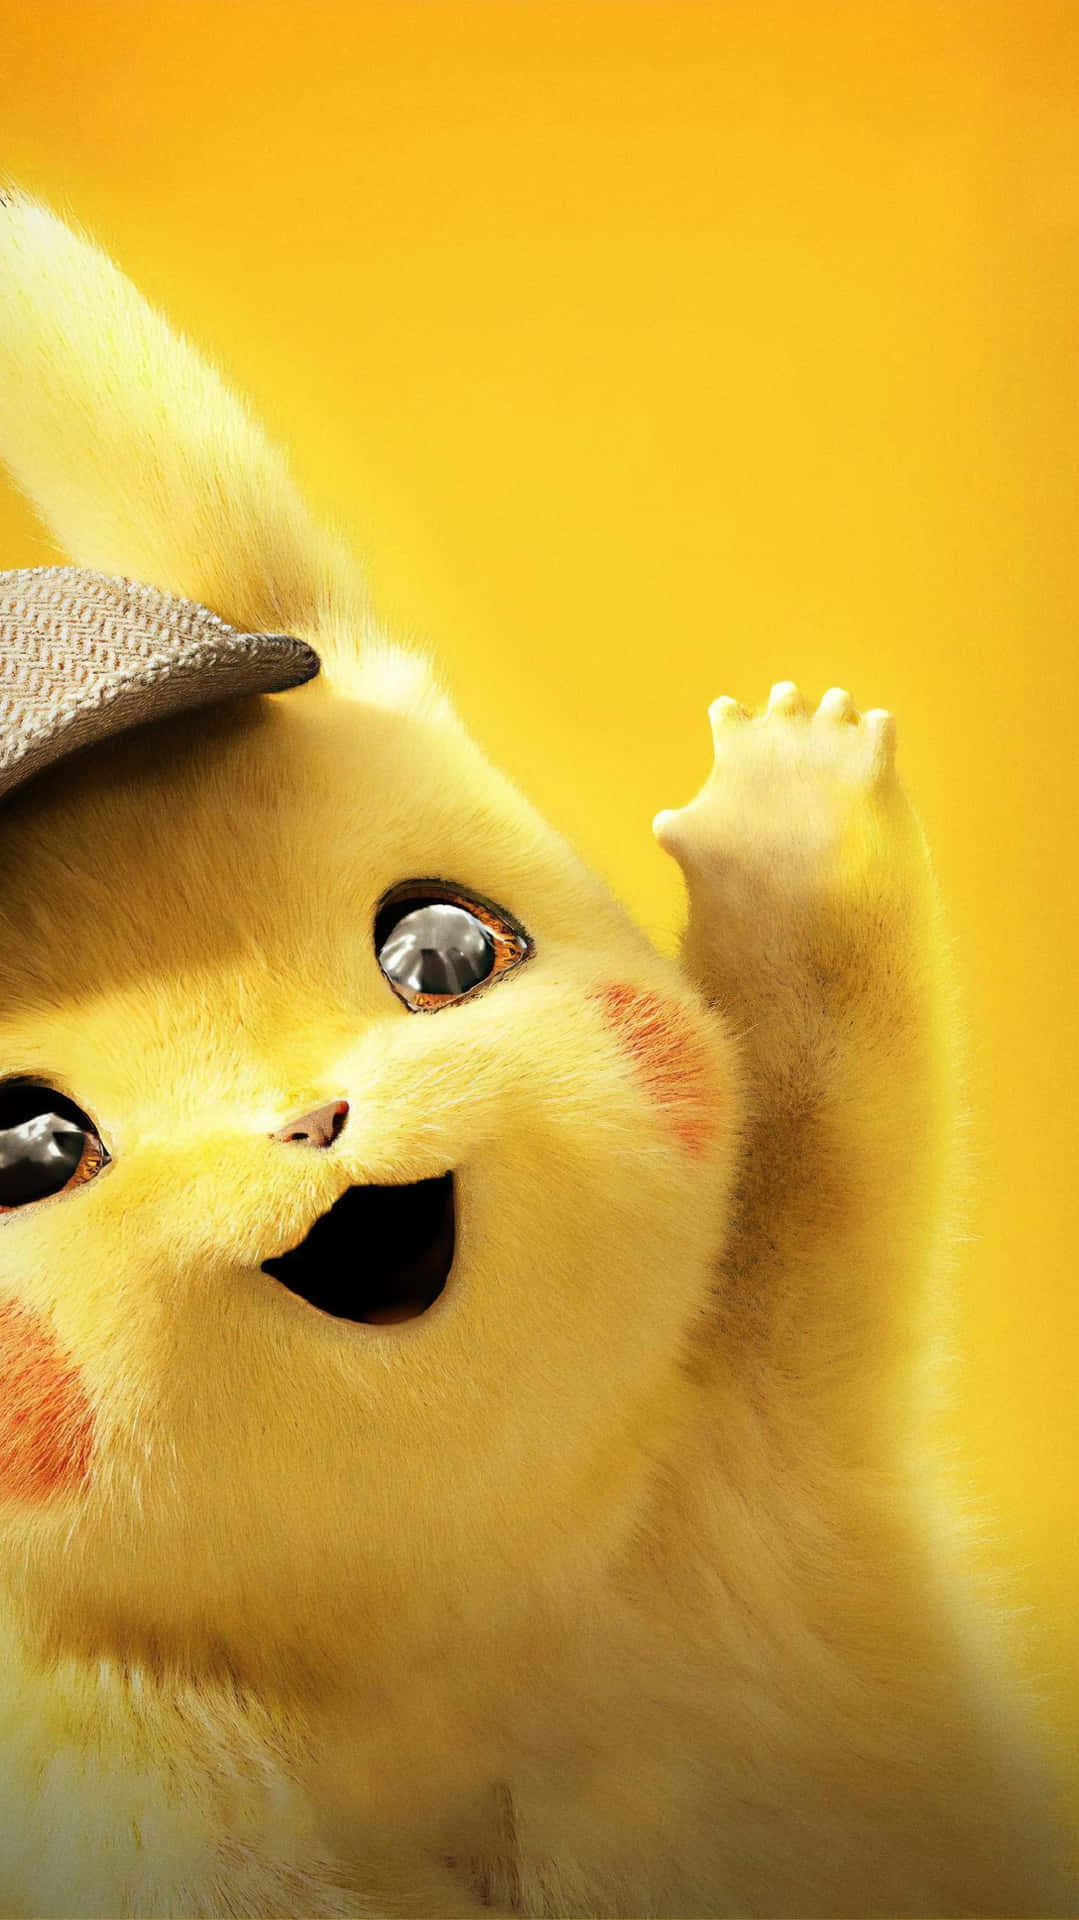 Pikachu Is Waving His Hat In The Background